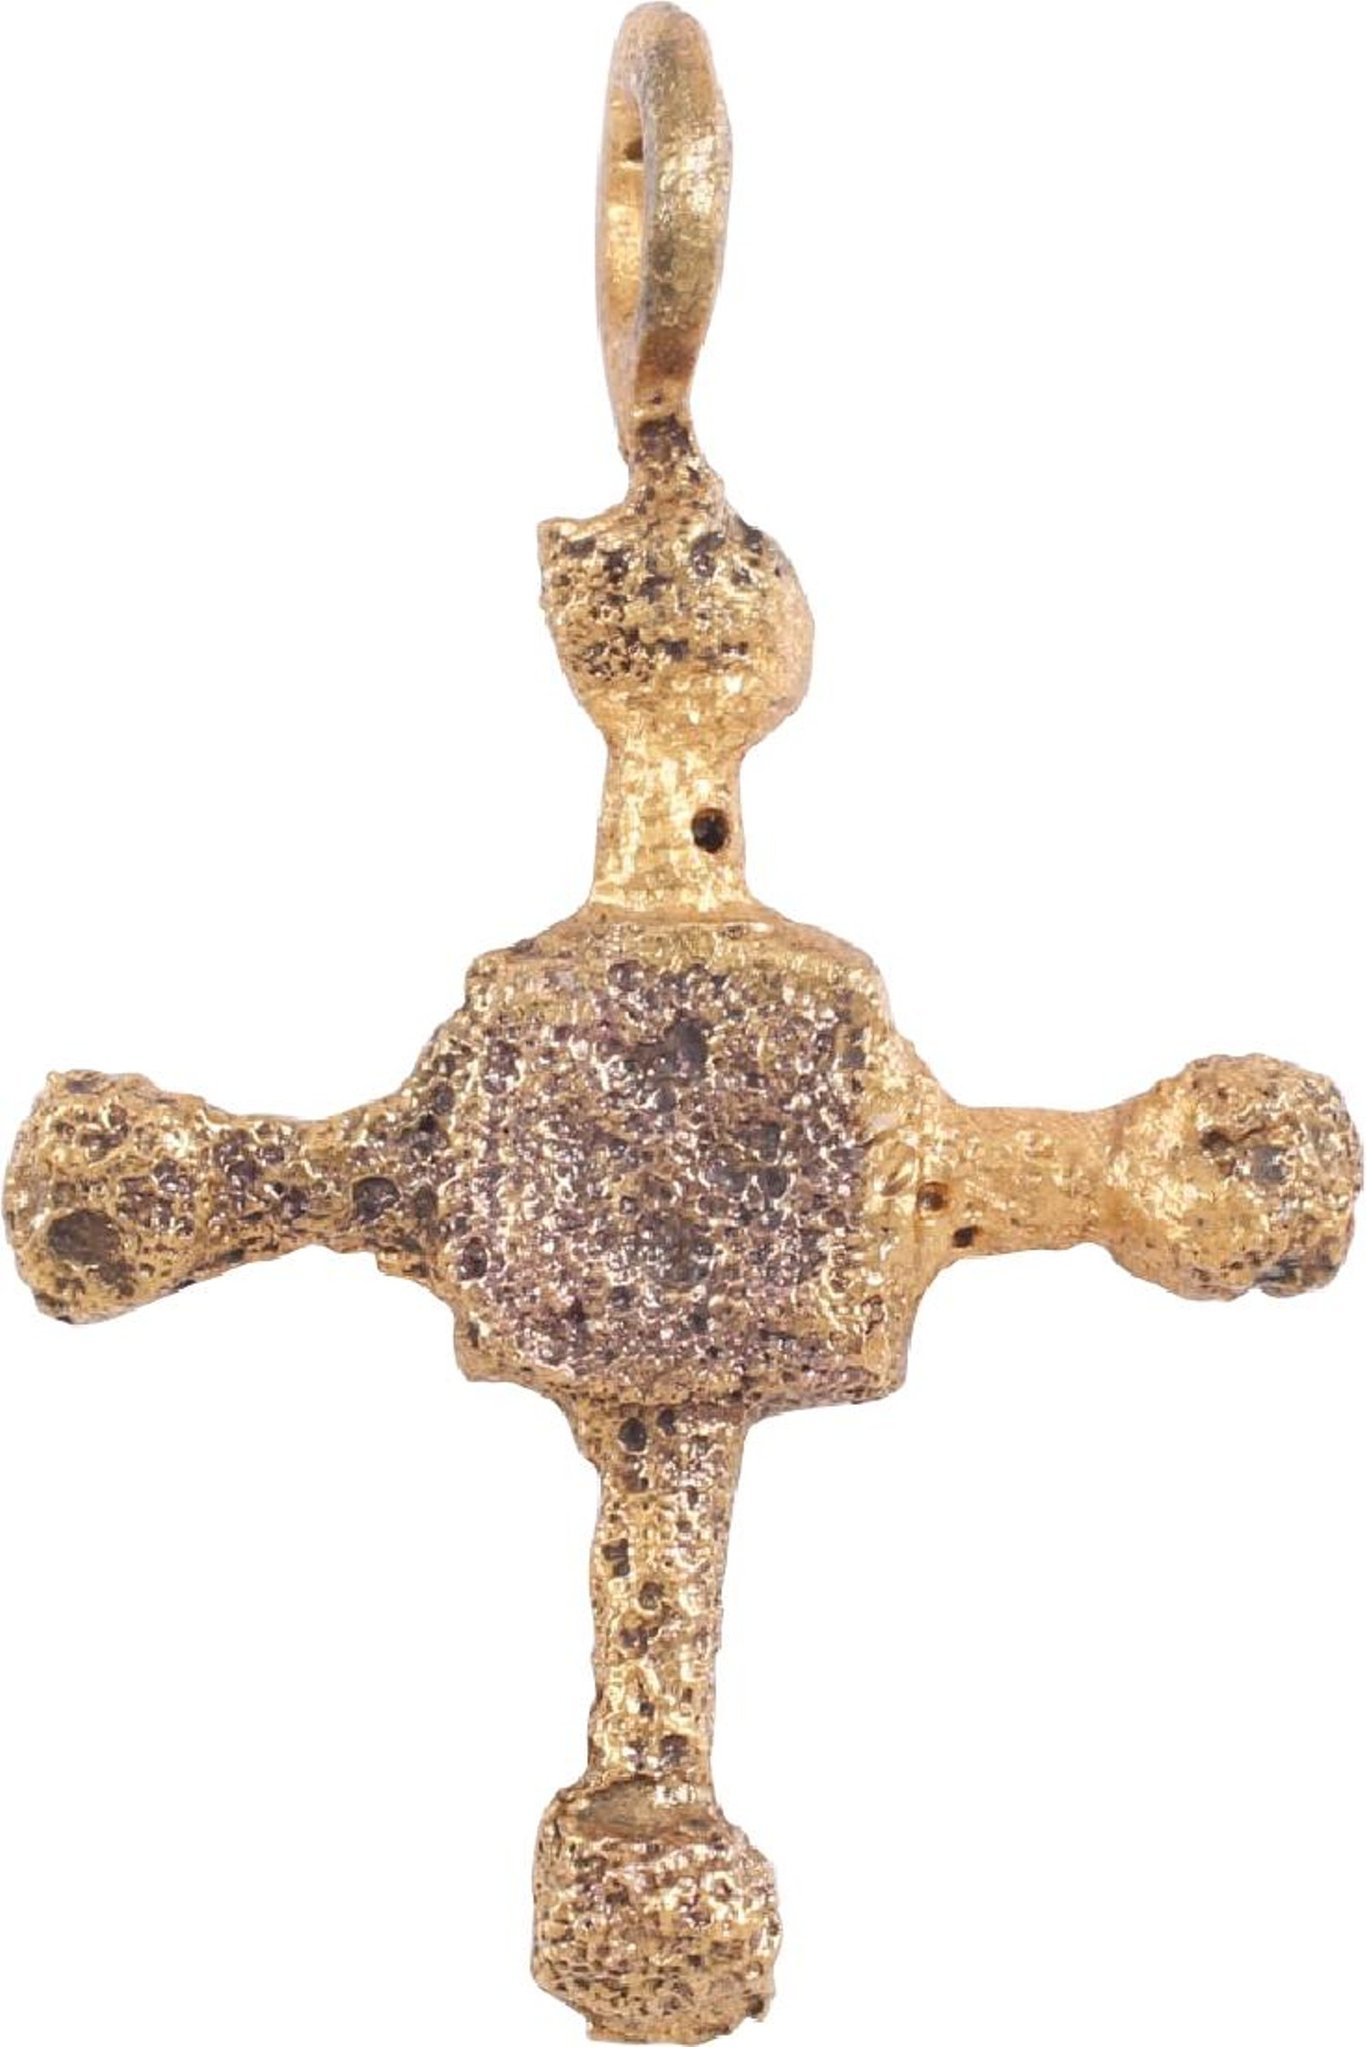 ANCIENT MEDIEVAL CHRISTIAN CROSS 8th-10th CENTURY | Medieval ...